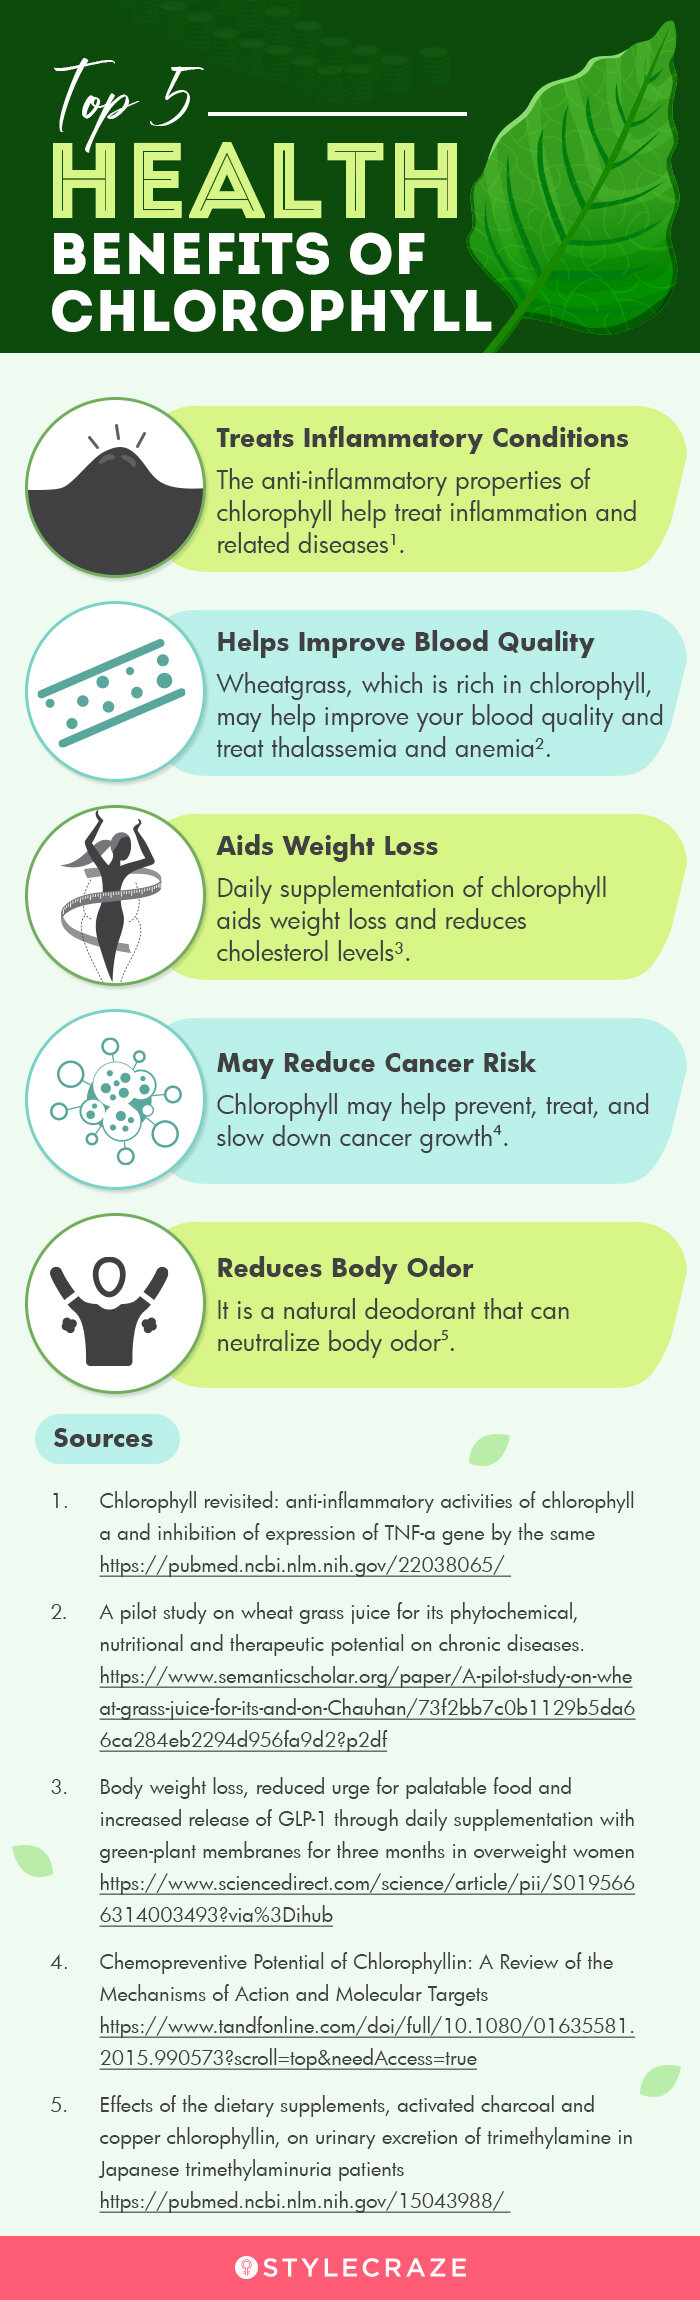 top 5 health benefits of chlorophyll [infographic]